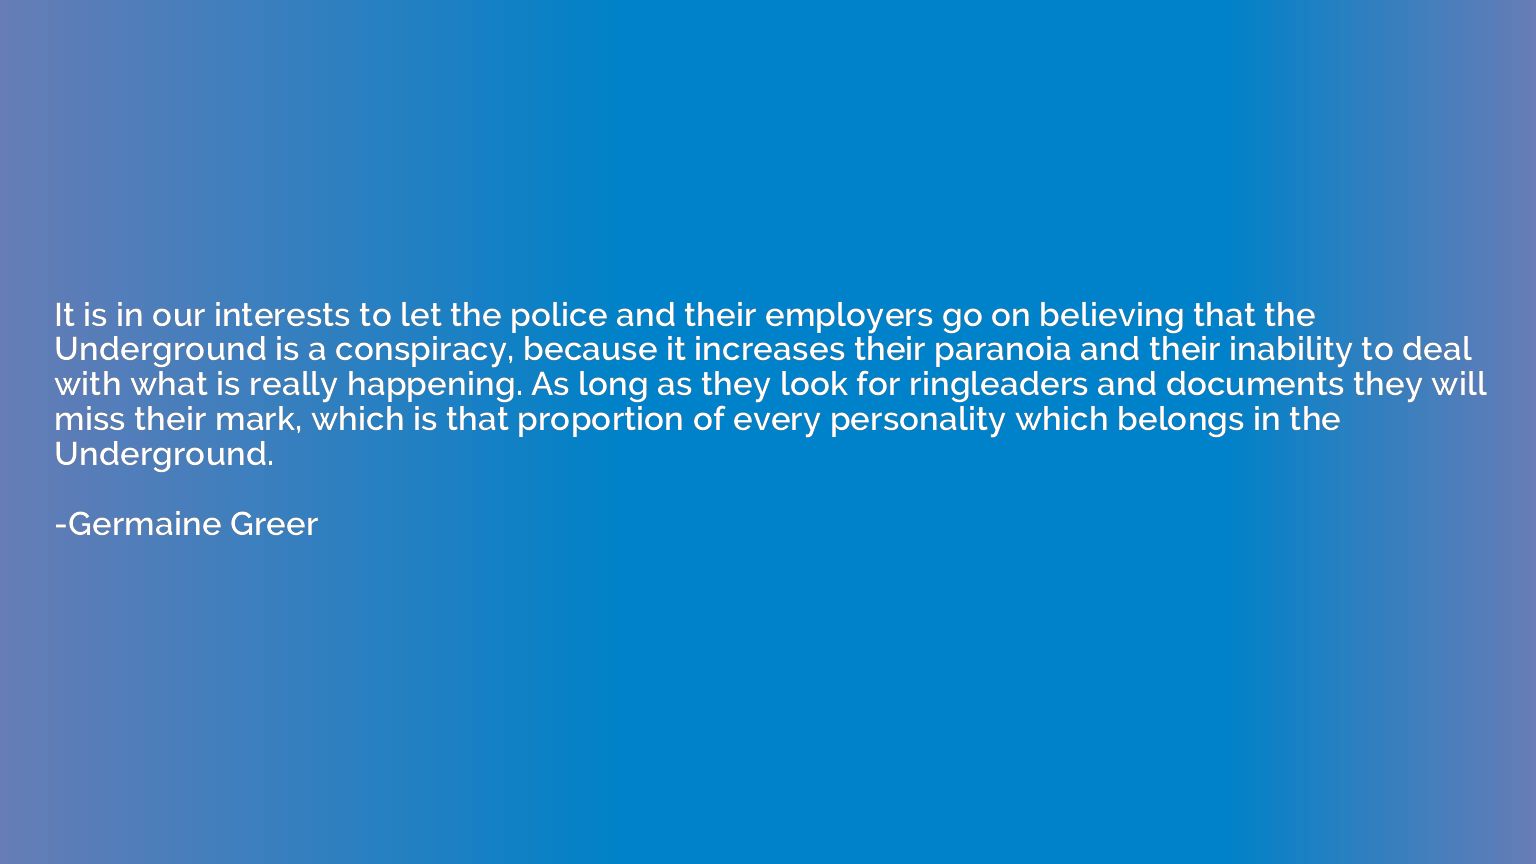 It is in our interests to let the police and their employers